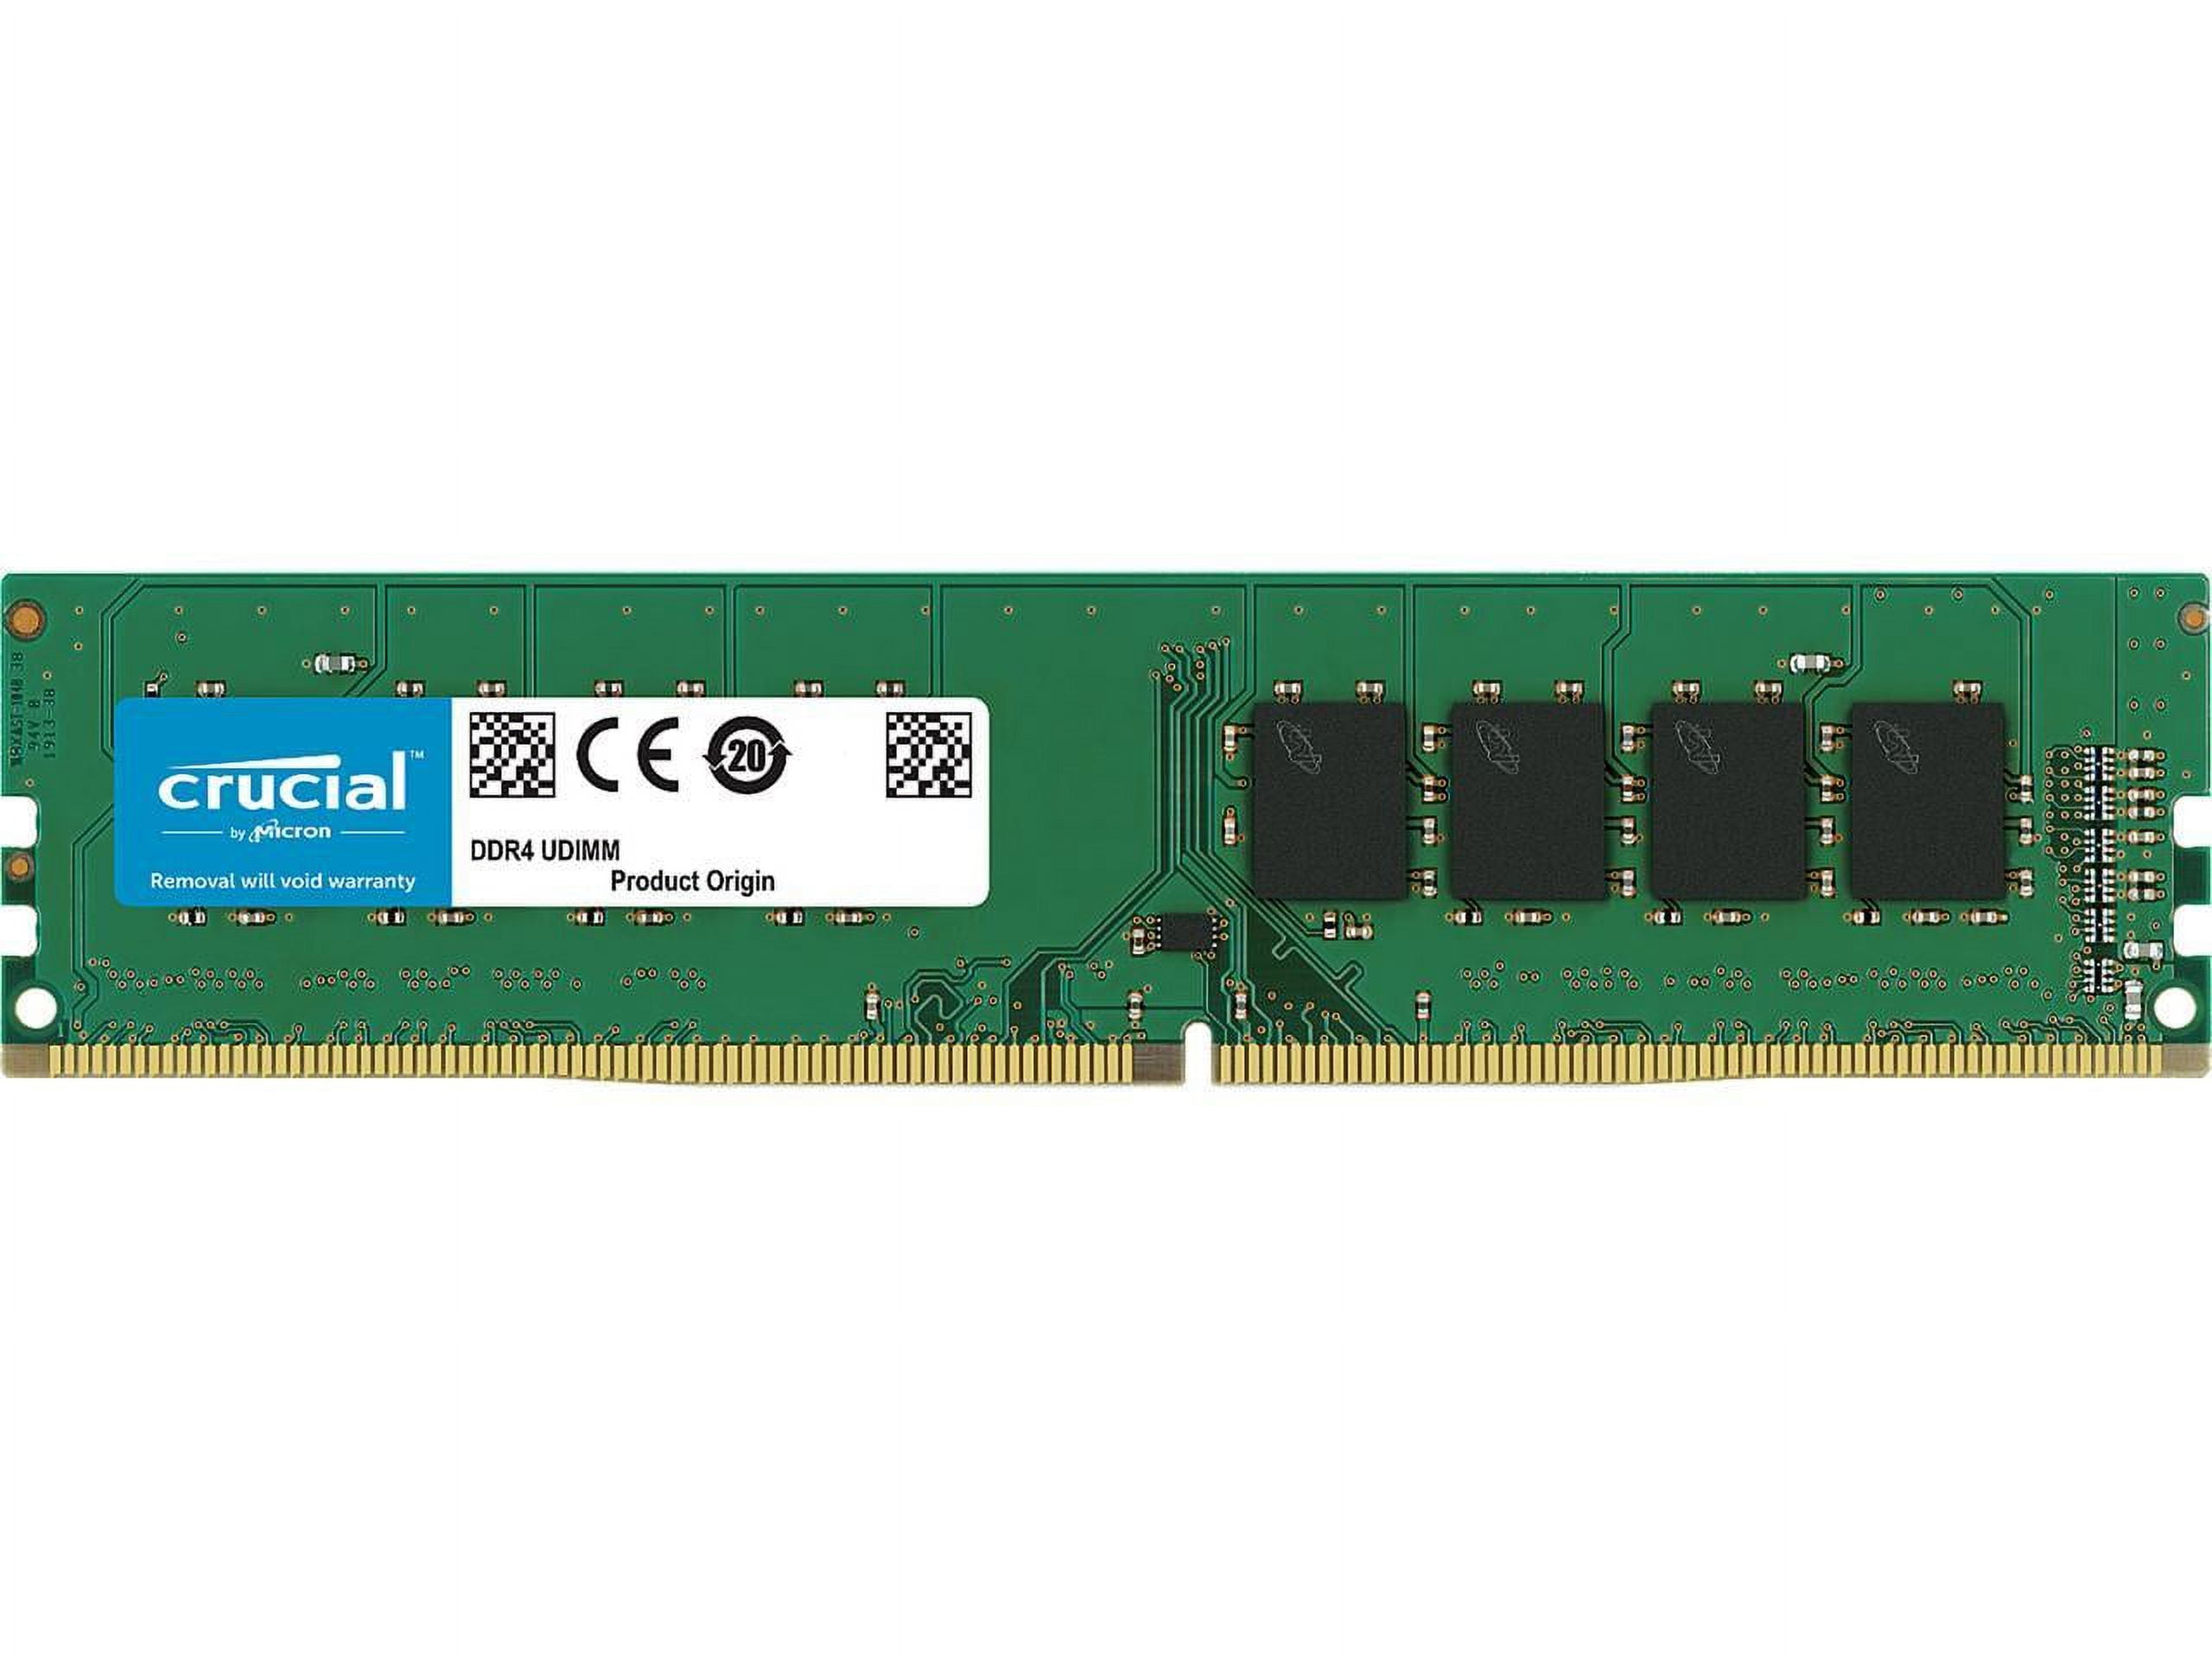 Picture of Crucial CT16G4DFRA32A 16GB DDR4 3200Mhz UDIMM Memory Module